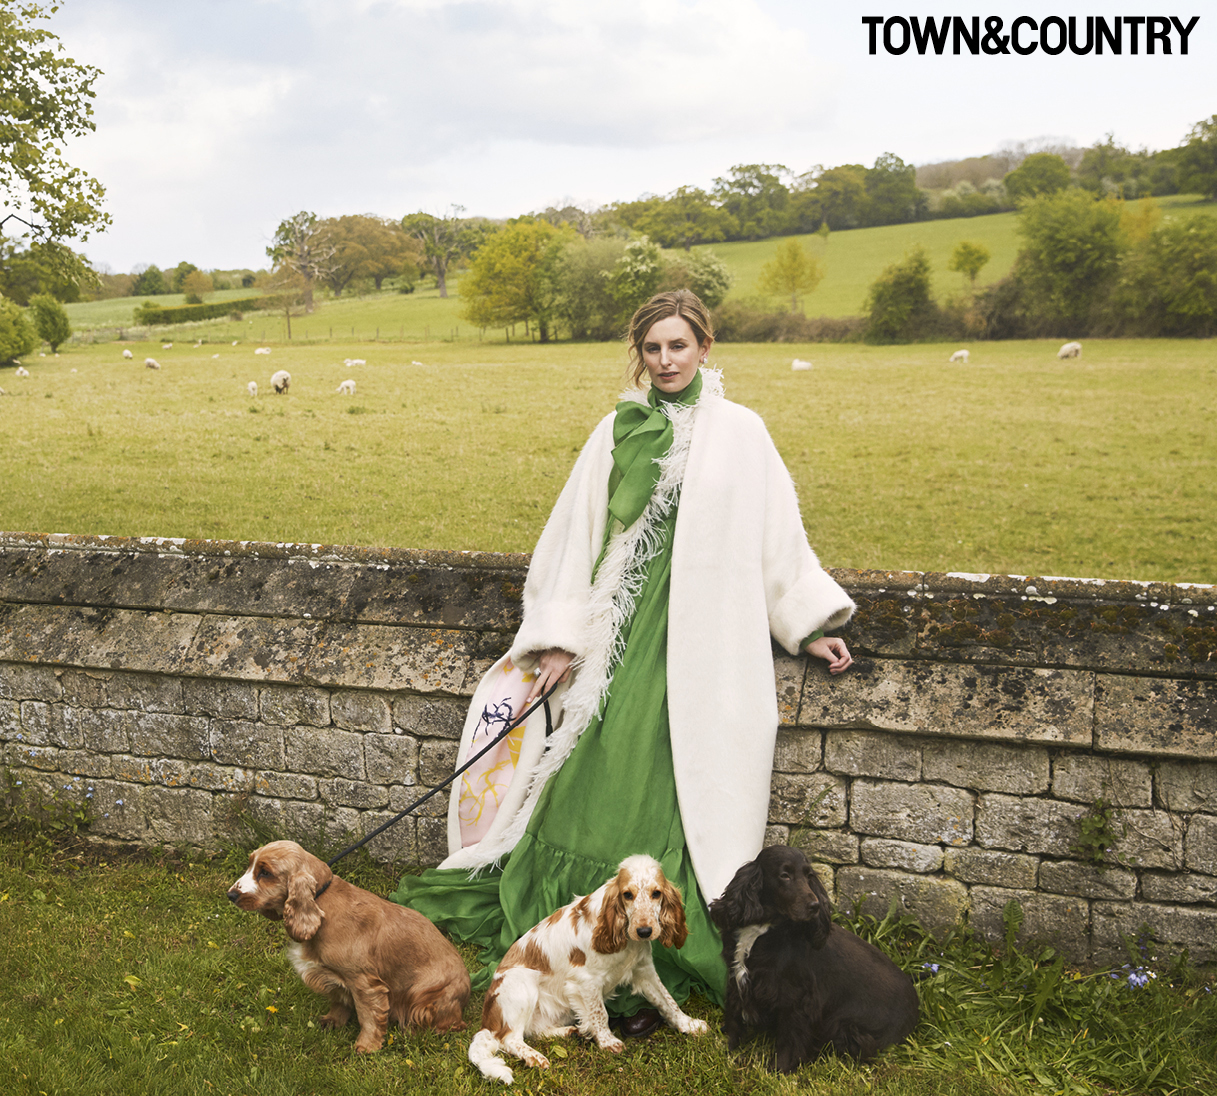 Laura Carmichael in Town & Country magazine 